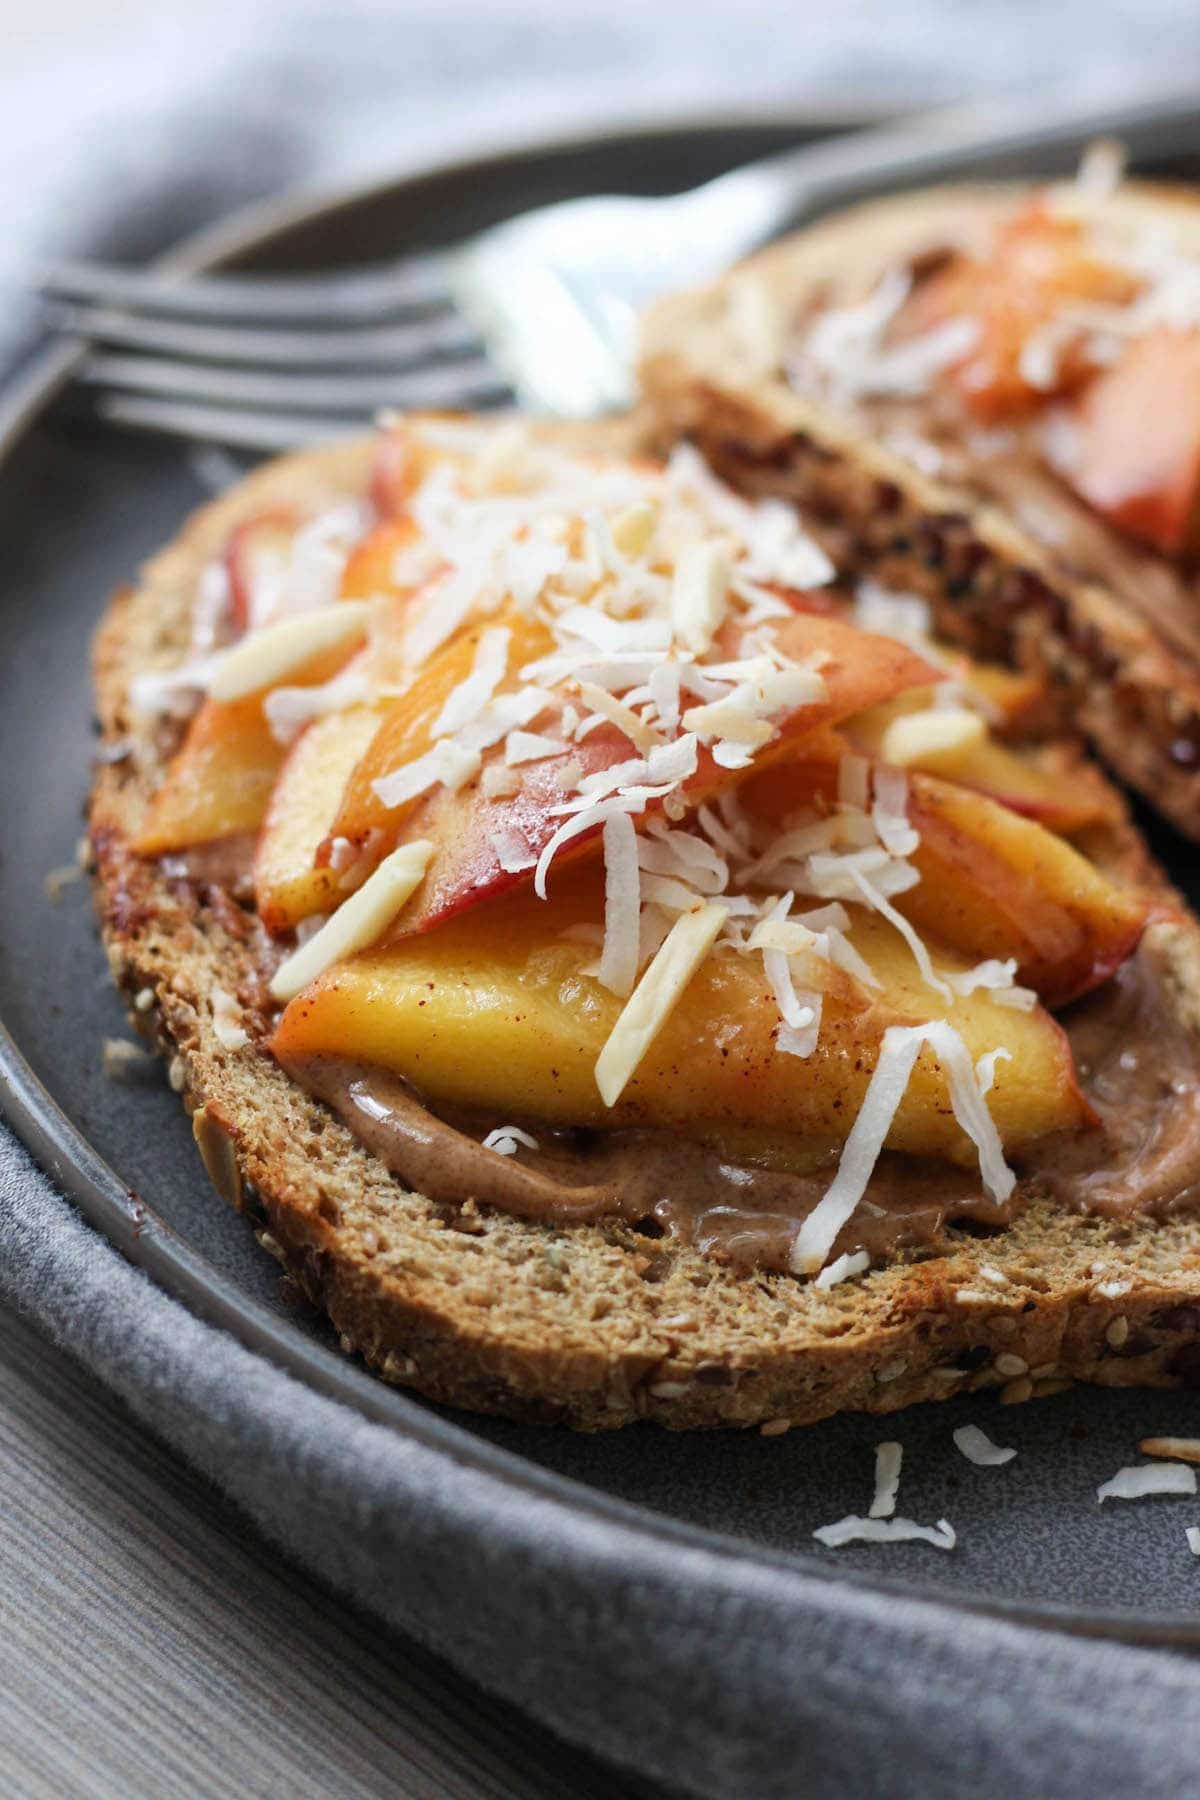 Toasted almonds and coconut on top of cinnamon peach and almond butter toast